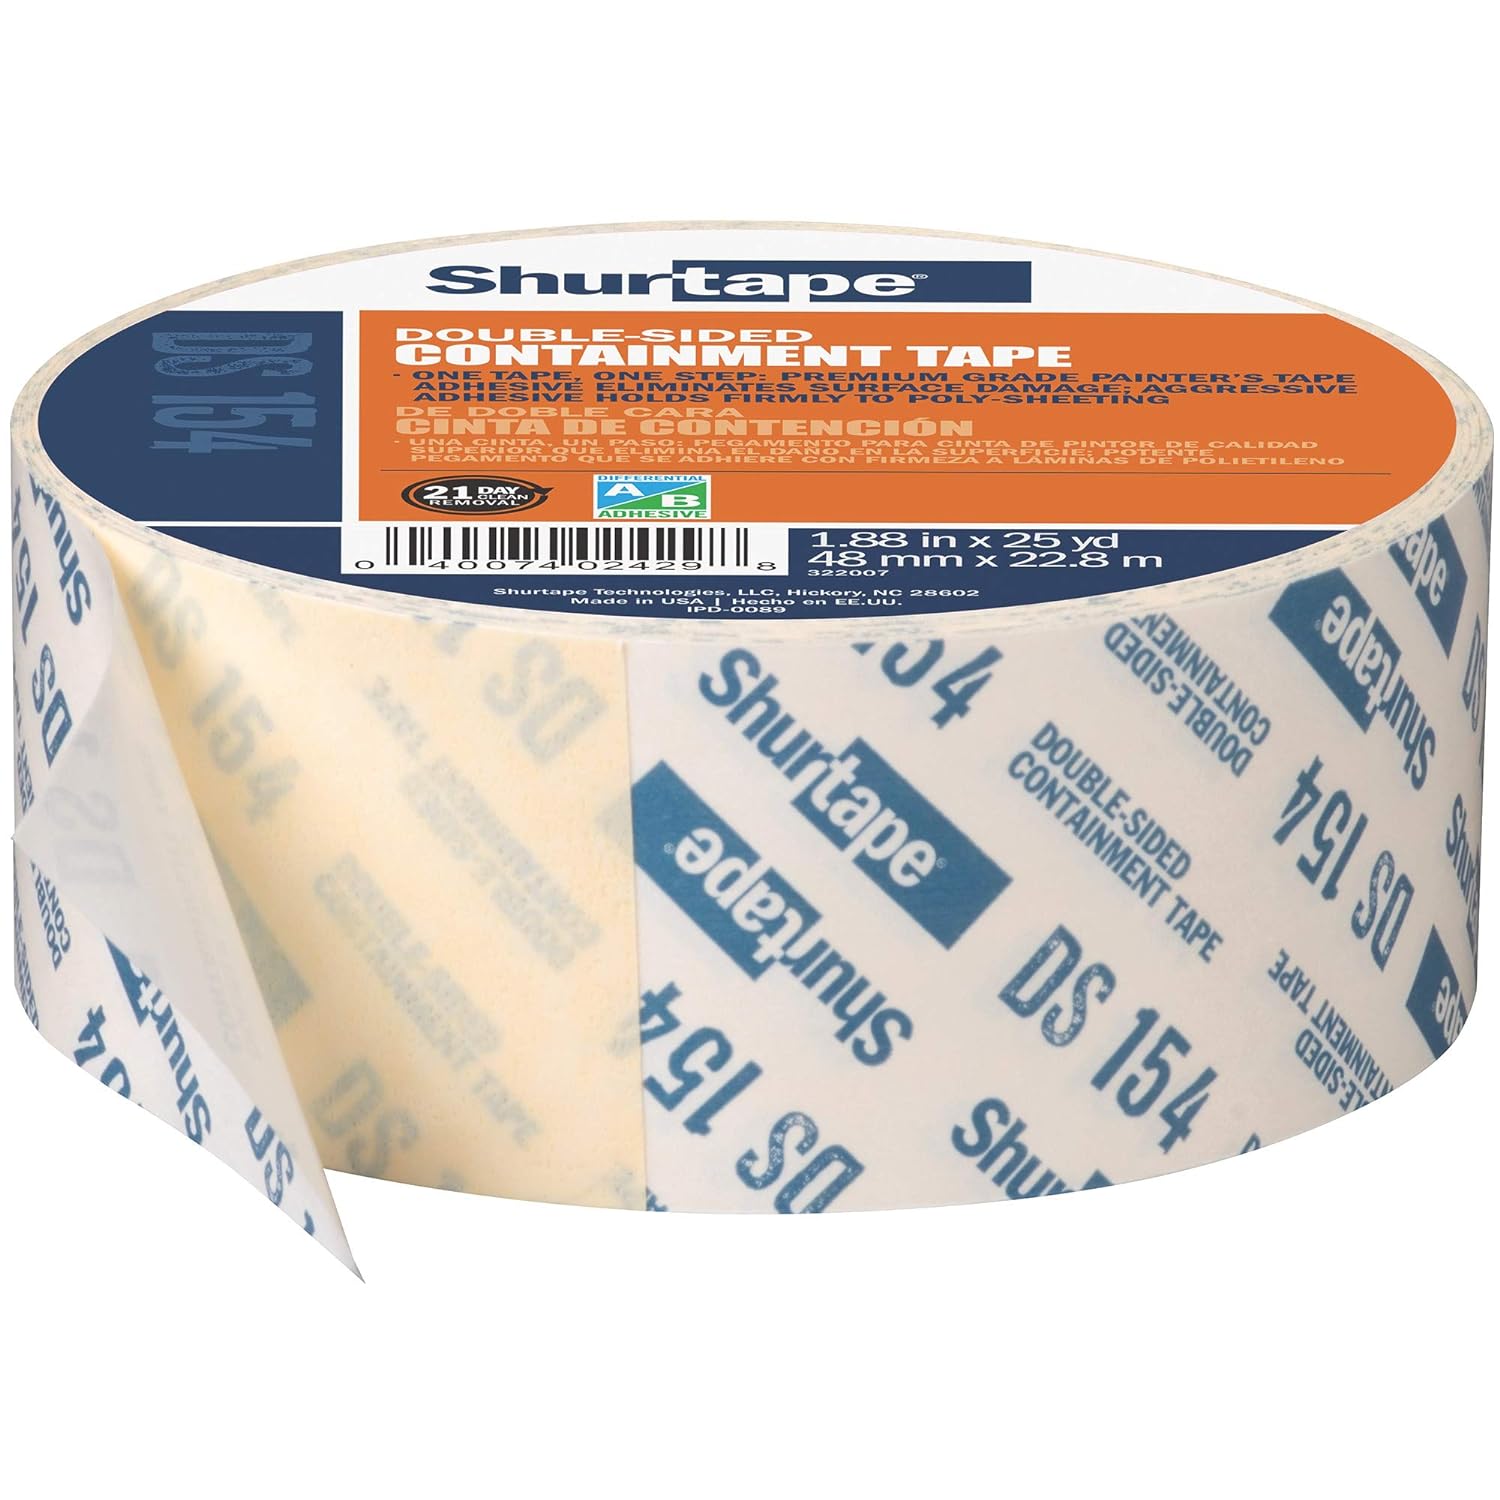 Shurtape DS 154 Double-Sided Containment Tape, 48mm x 23 Meters 24/cs